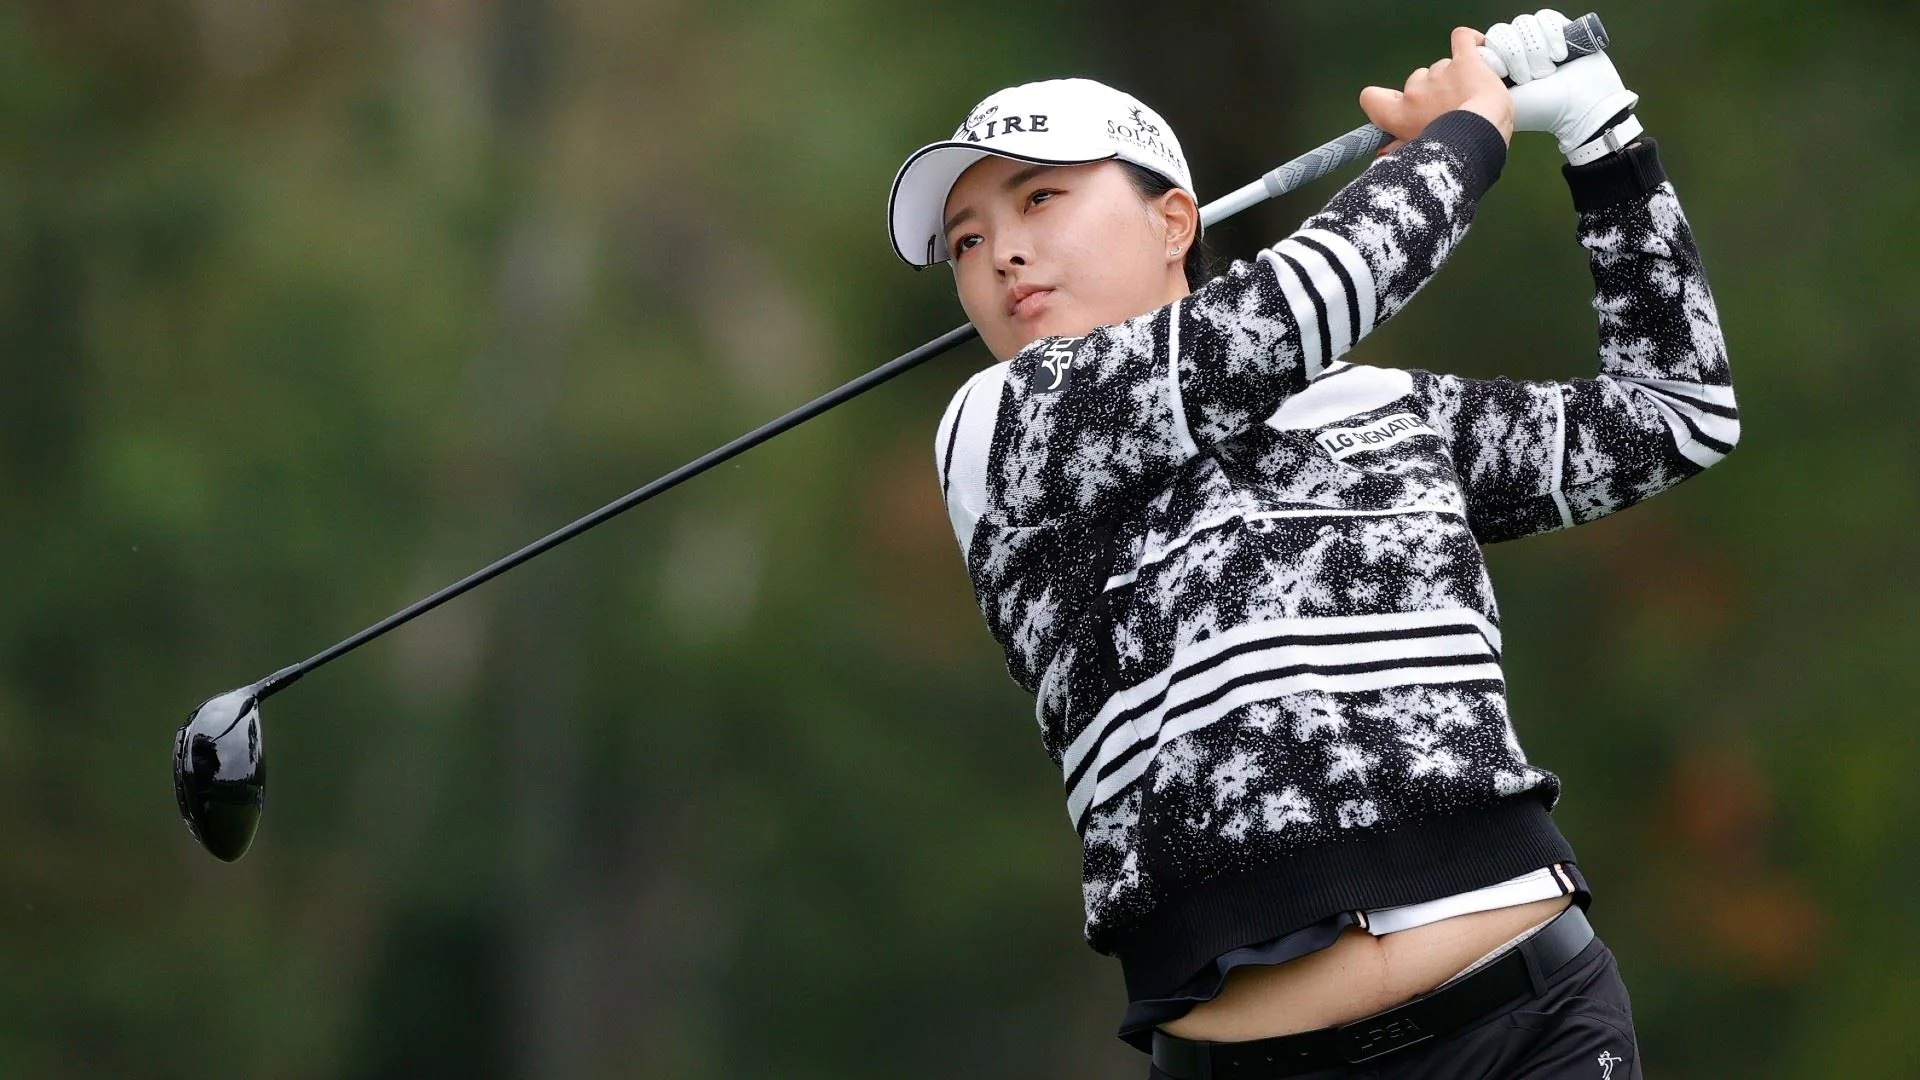 Jin Young Ko chasing Annika Sorenstam’s sub-70 record at Founders Cup